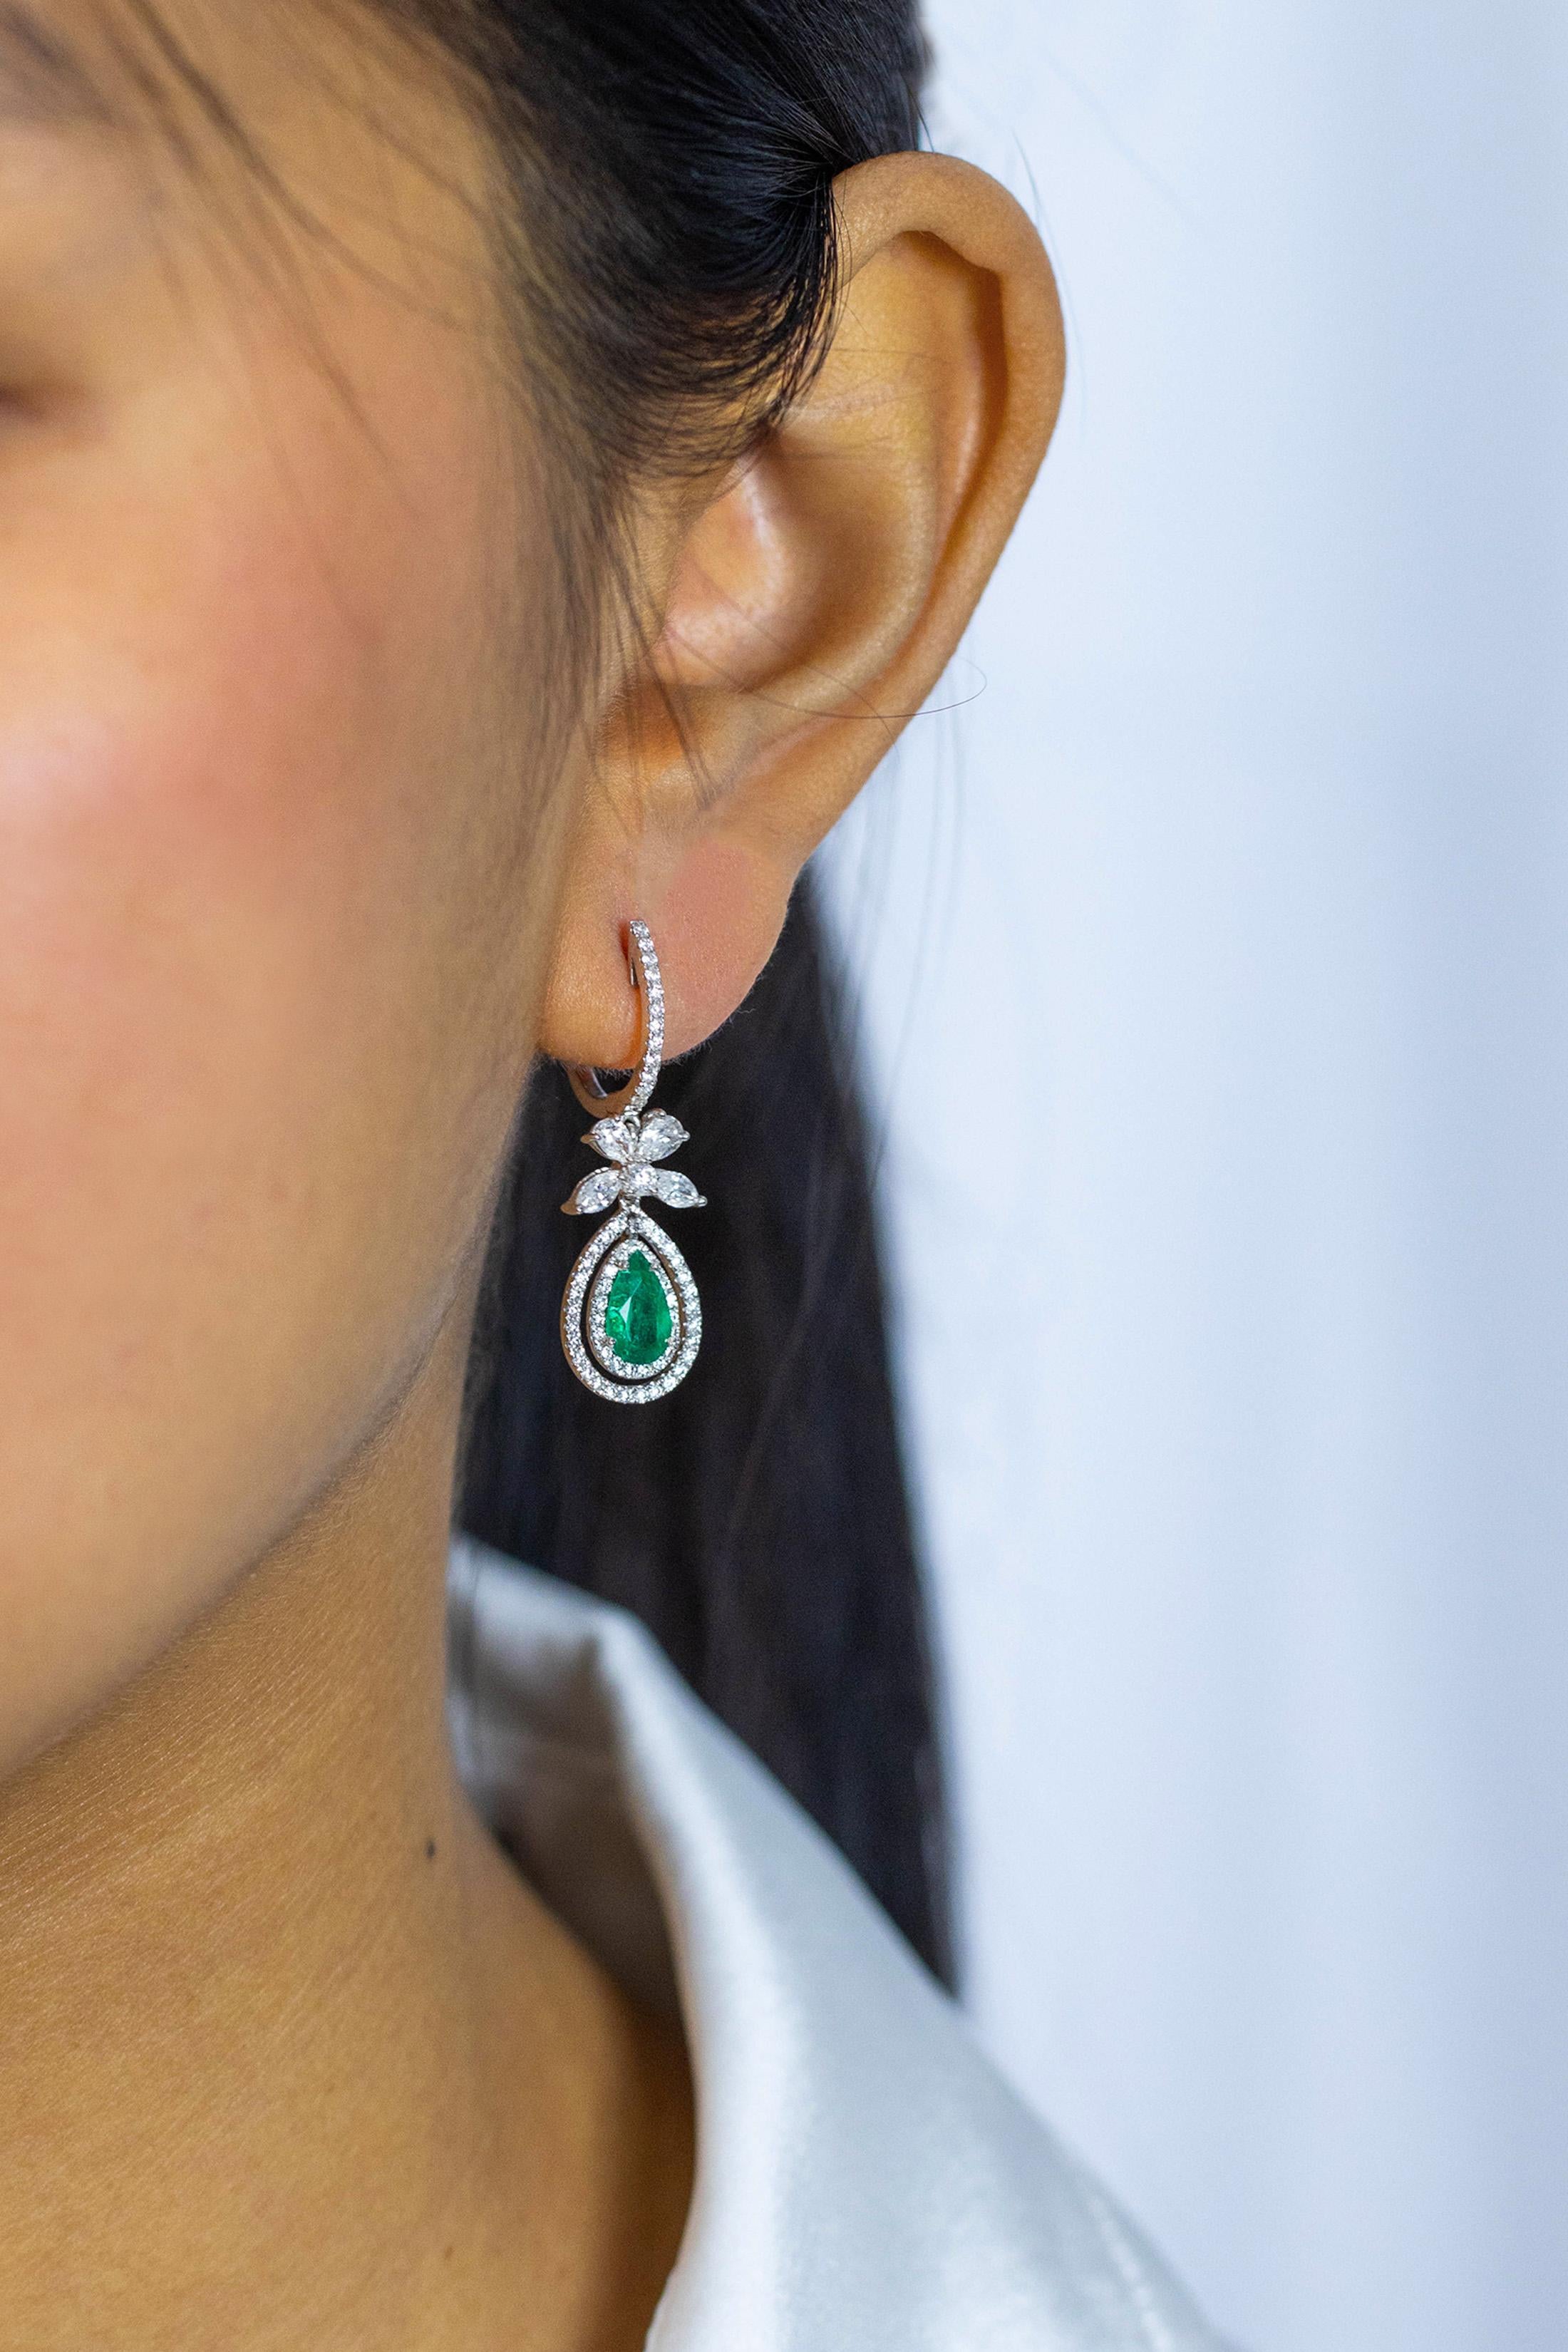 These gorgeous earrings feature a pear shaped green emerald center stone weighing 1.14 carats with 2 rows of brilliant round diamonds that go around the emerald. A bow-like figure made with diamonds hang on top of the emeralds and even more round